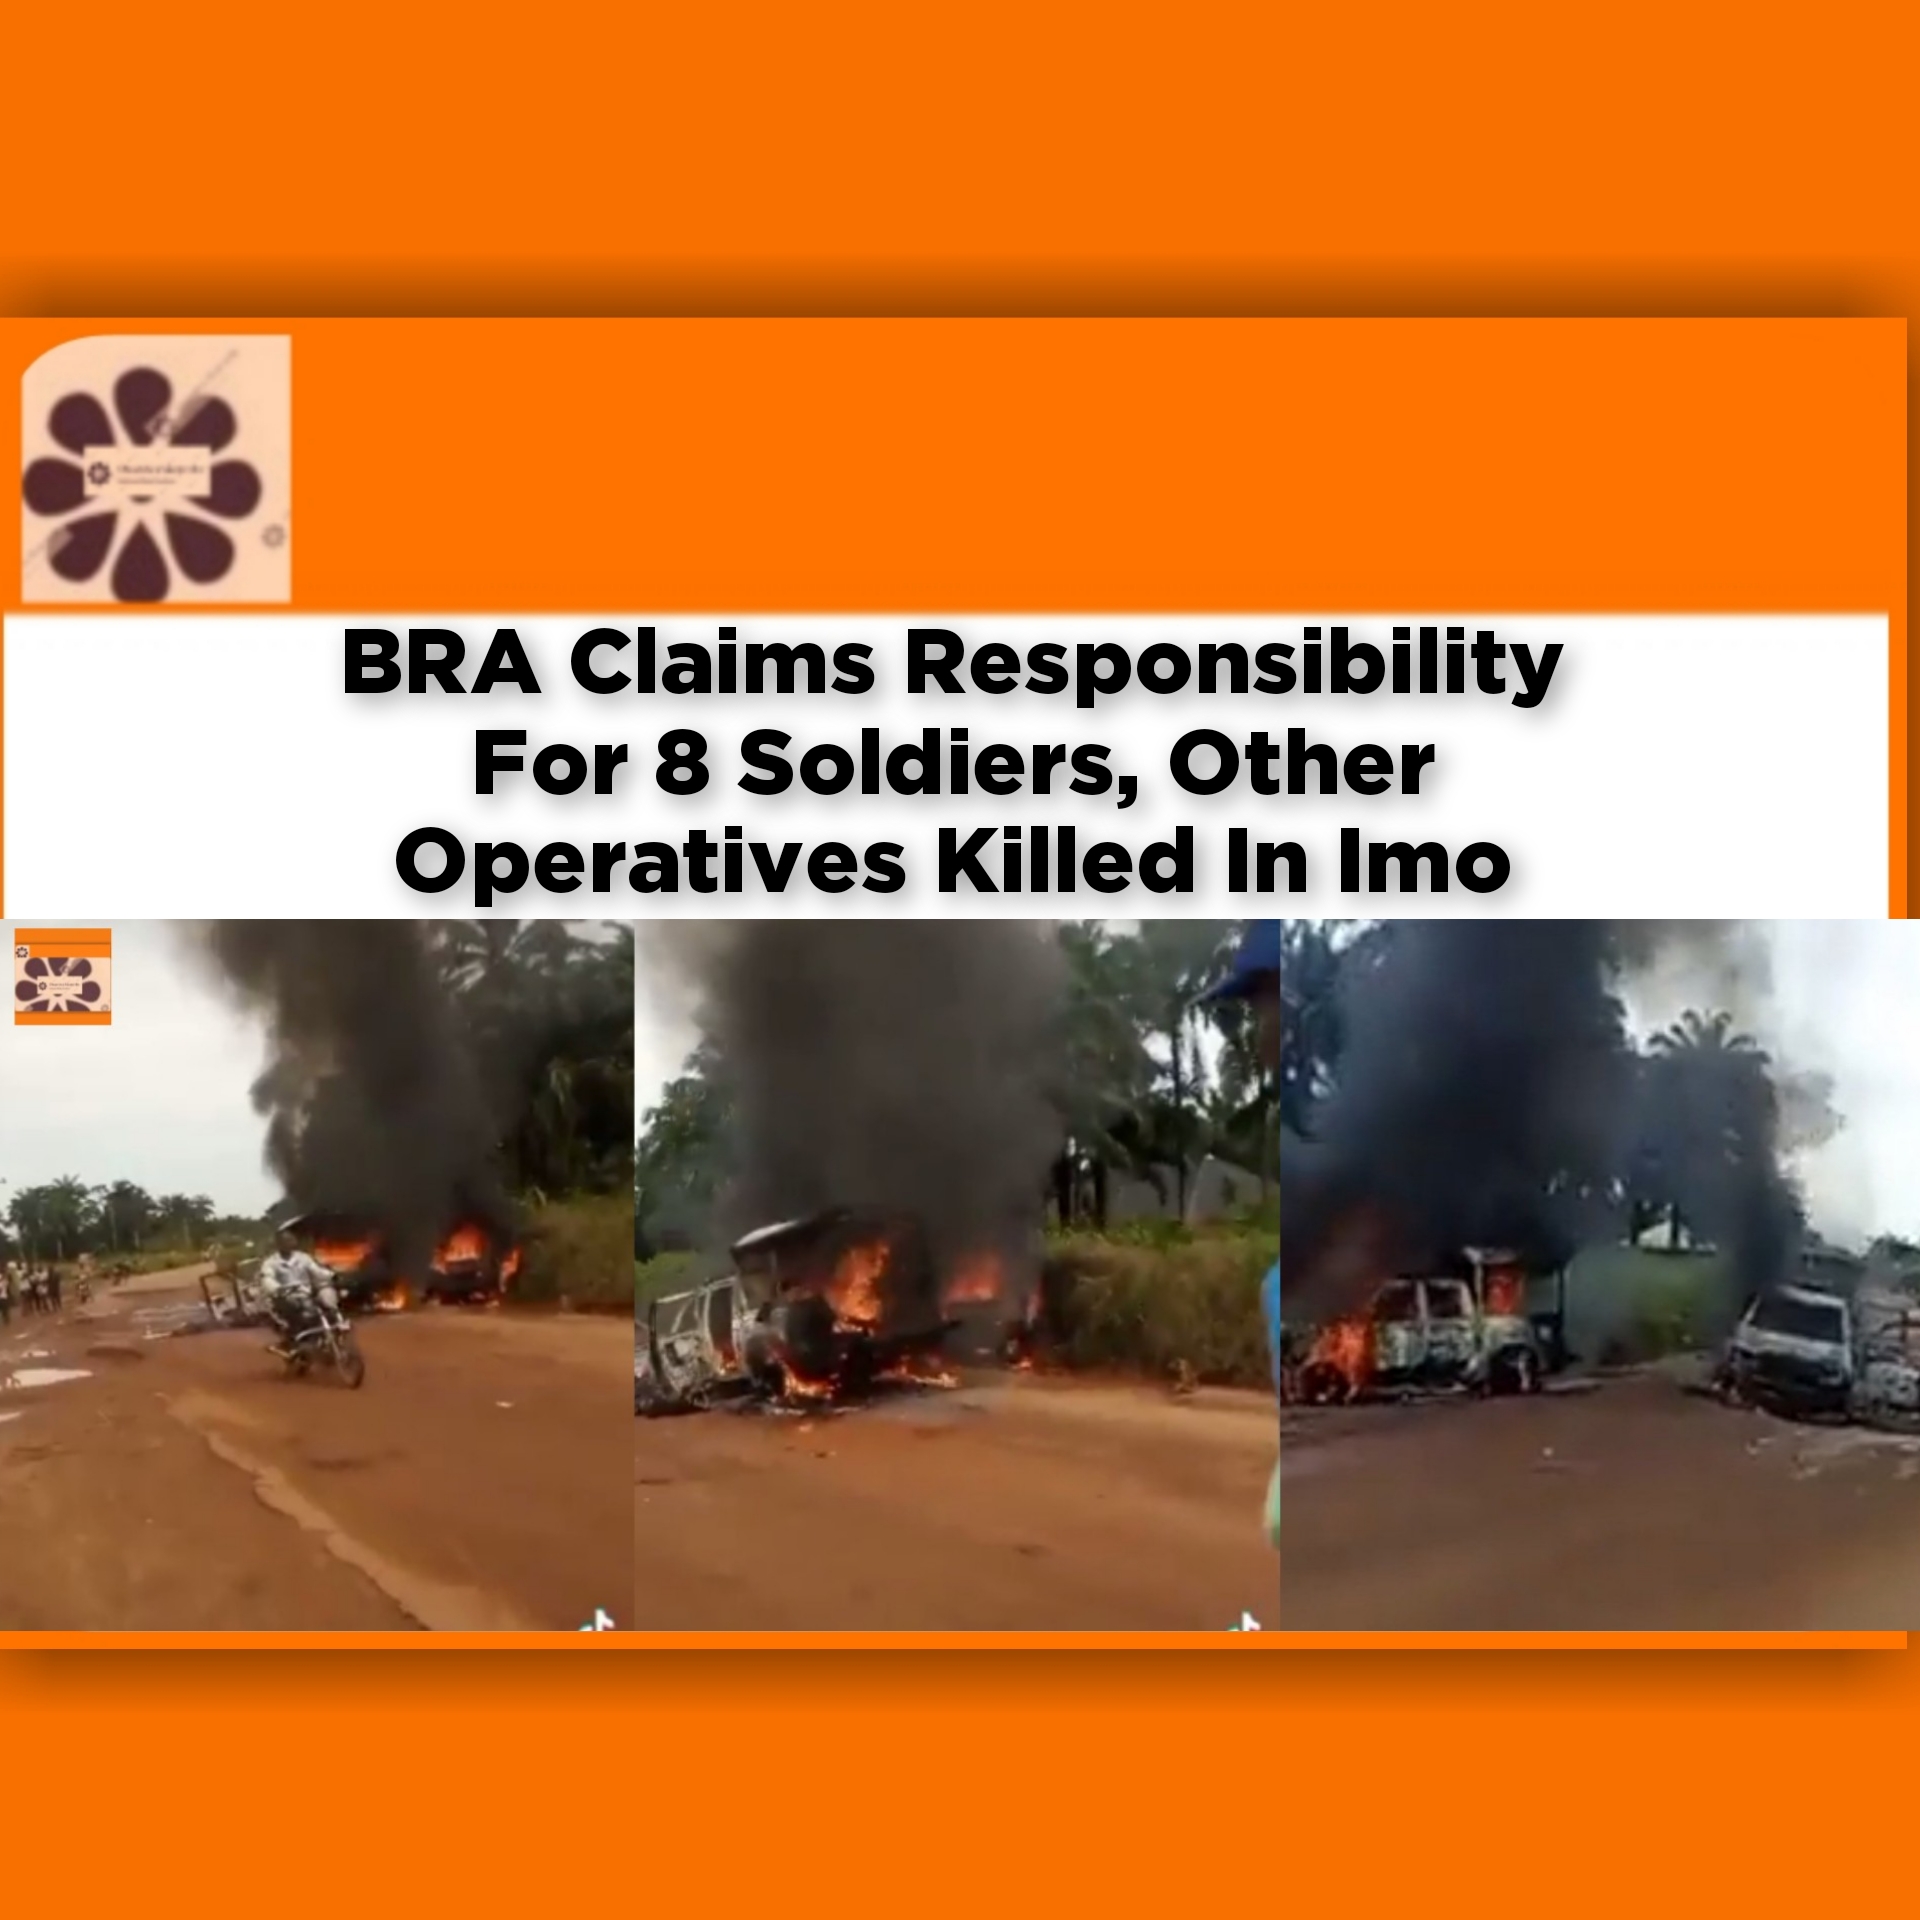 BRA Claims Responsibility For 8 Soldiers, Other Operatives Killed In Imo ~ OsazuwaAkonedo #Fulani